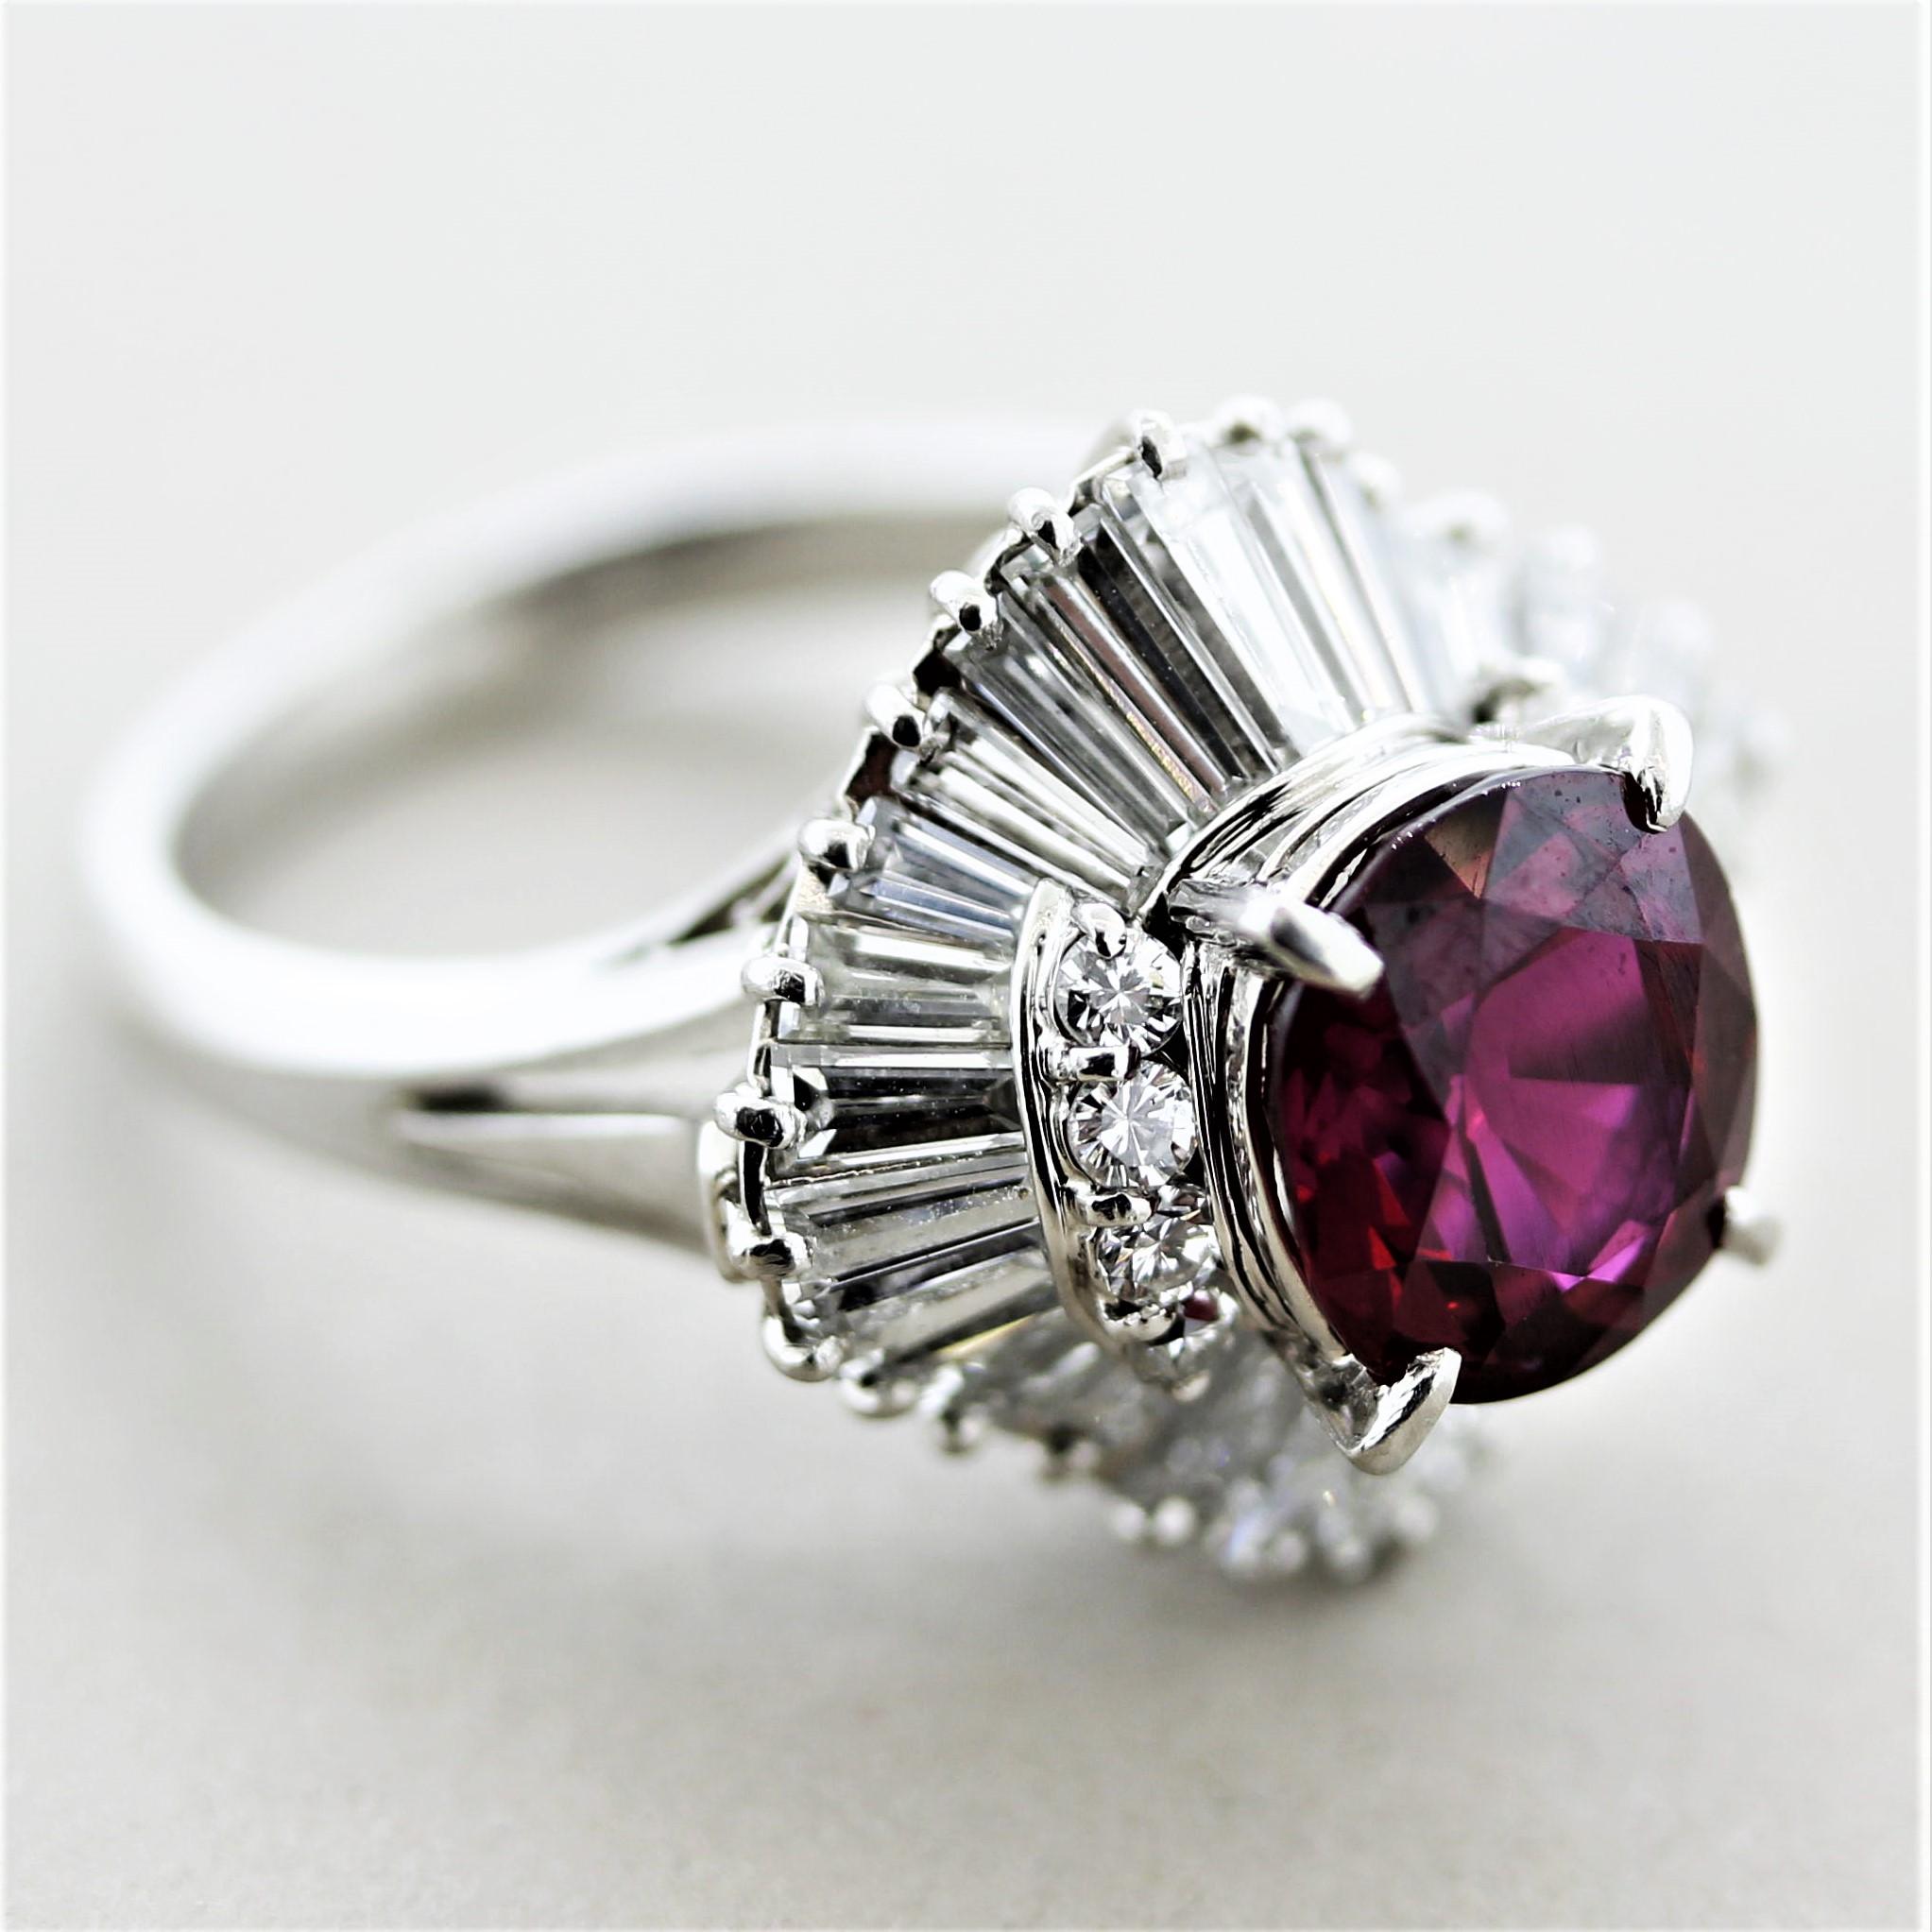 Exceptionally Fine No-Heat Ruby Diamond Platinum Ring, GIA Certified For Sale 1